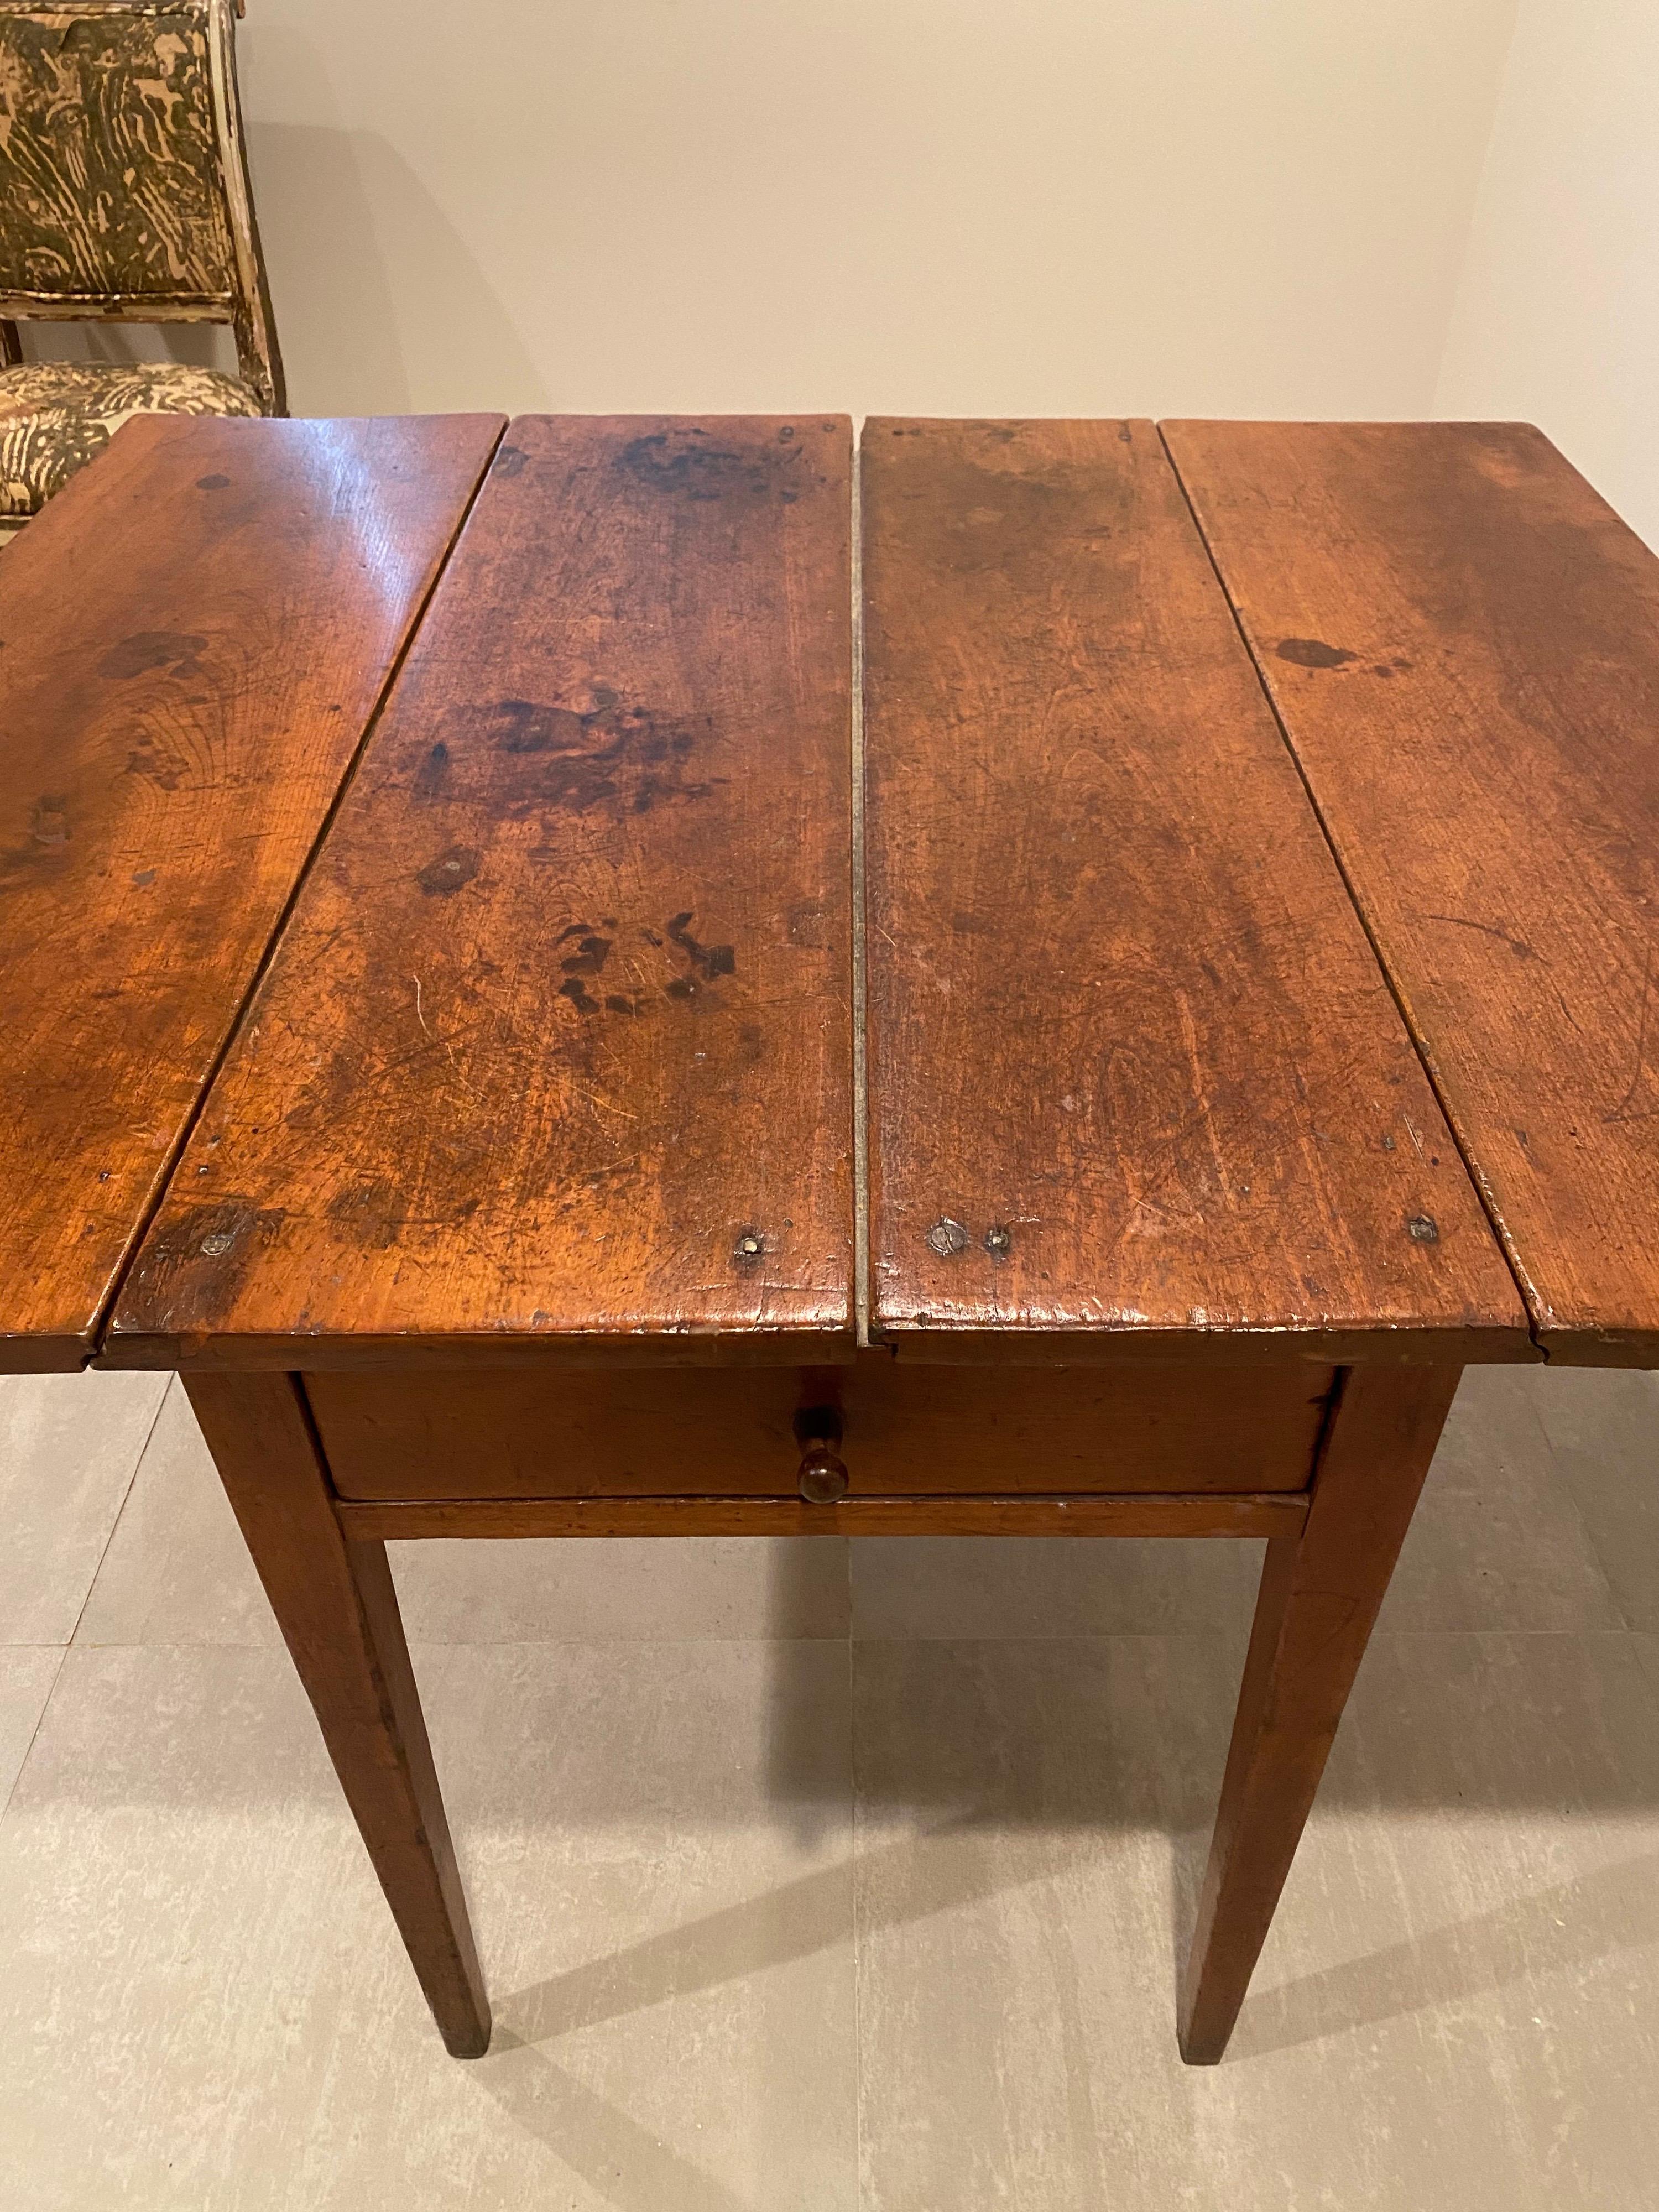 19th Century American Mahogany Drop-Leaf Table In Good Condition For Sale In Southampton, NY